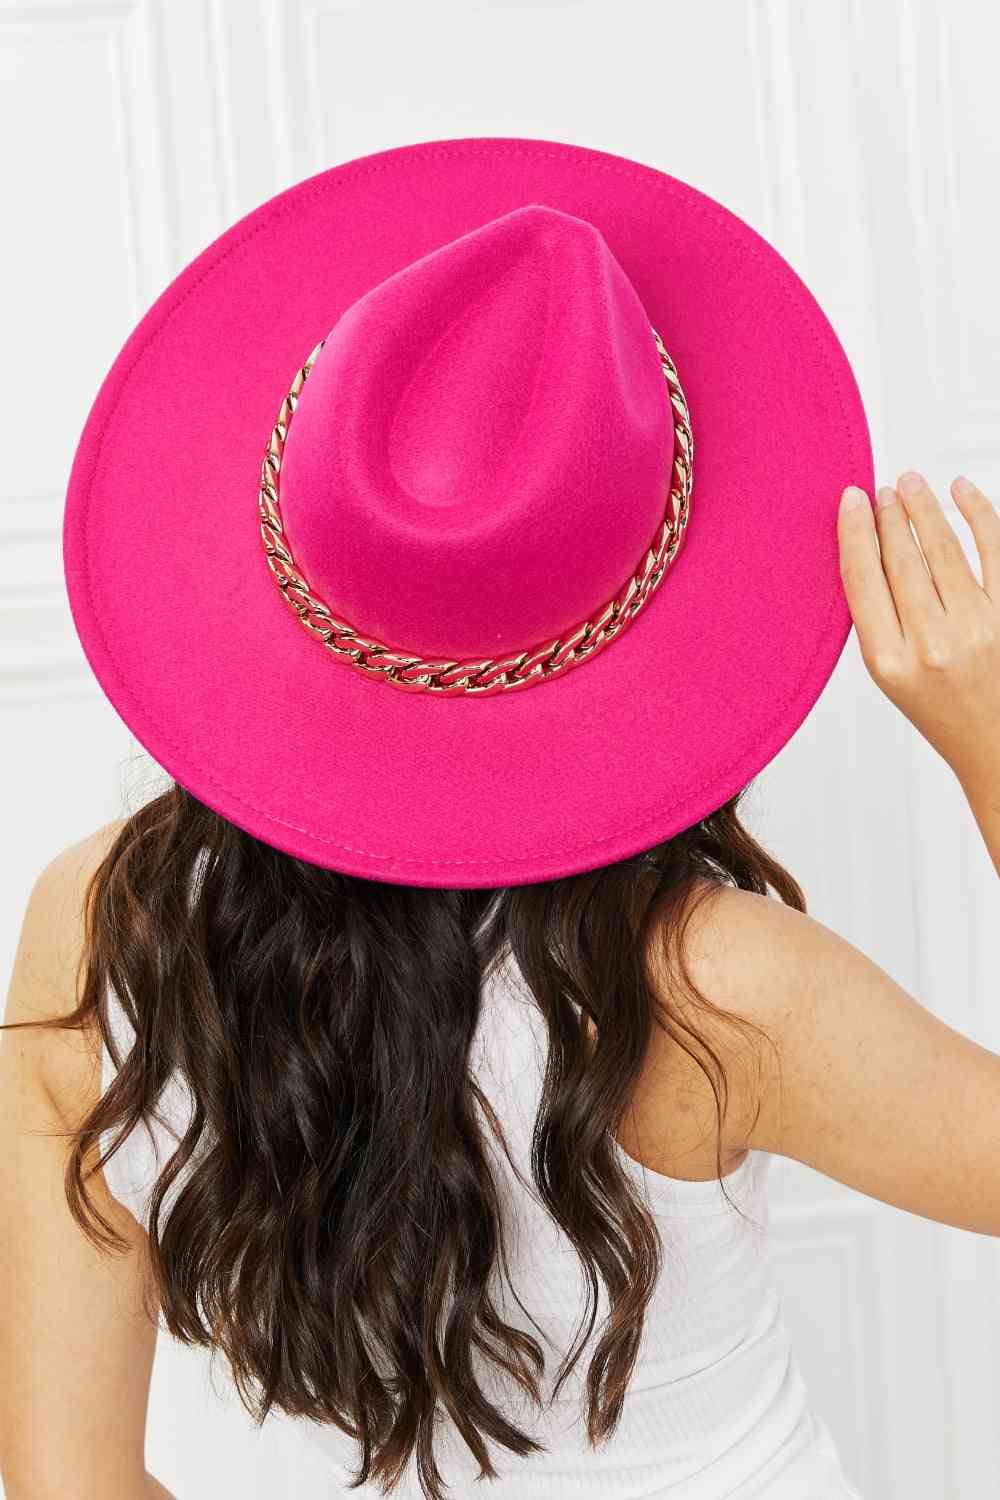 Keep Your Promise Fedora Hat in Pink - Mythical Kitty Boutique